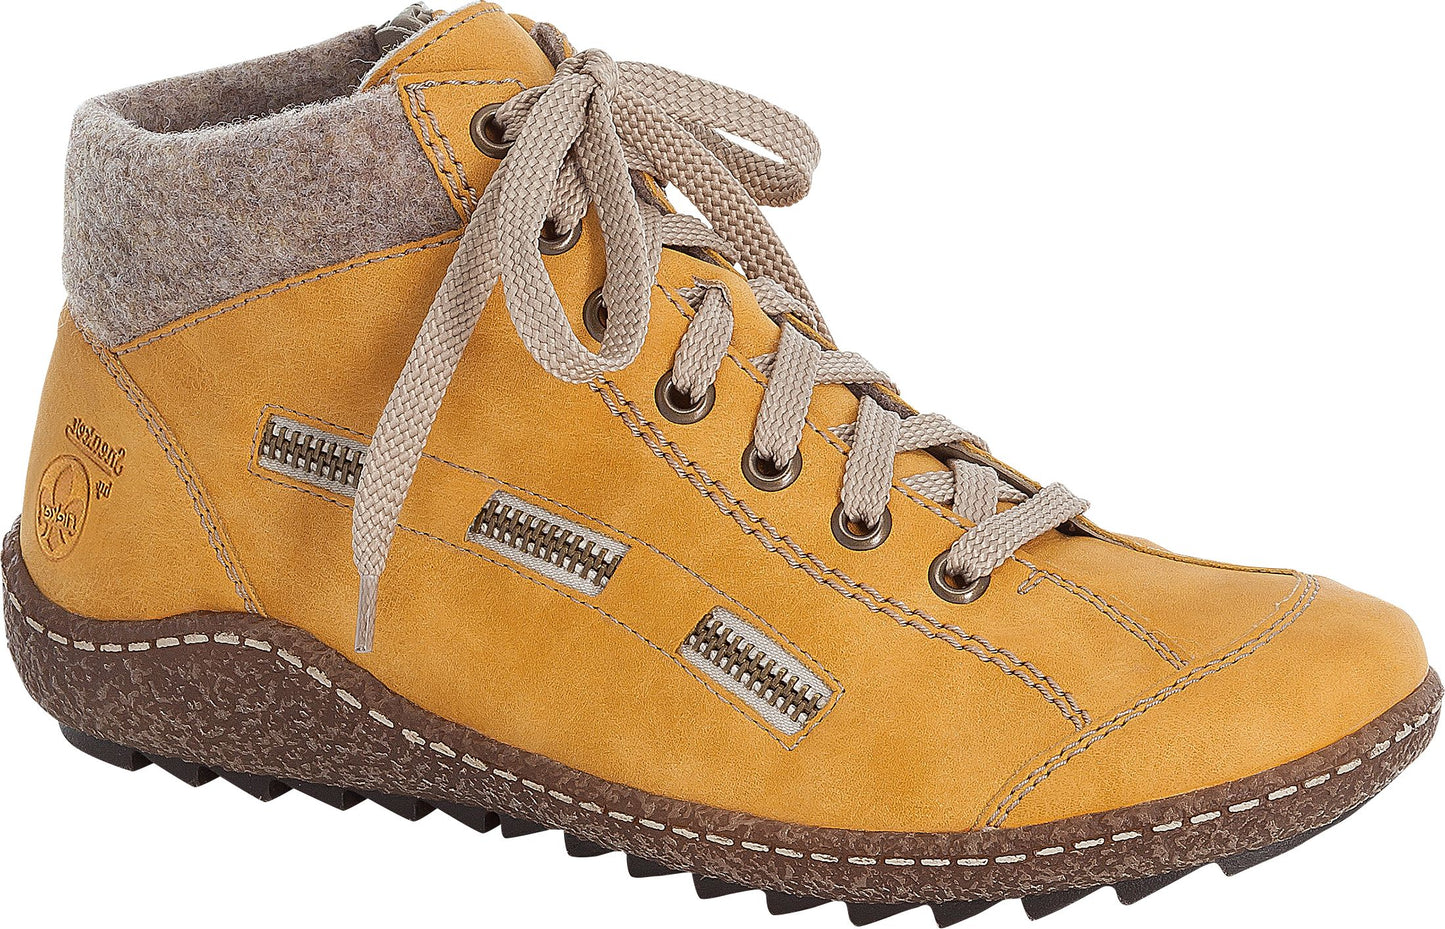 Rieker Boots Yellow Lace Up Boot